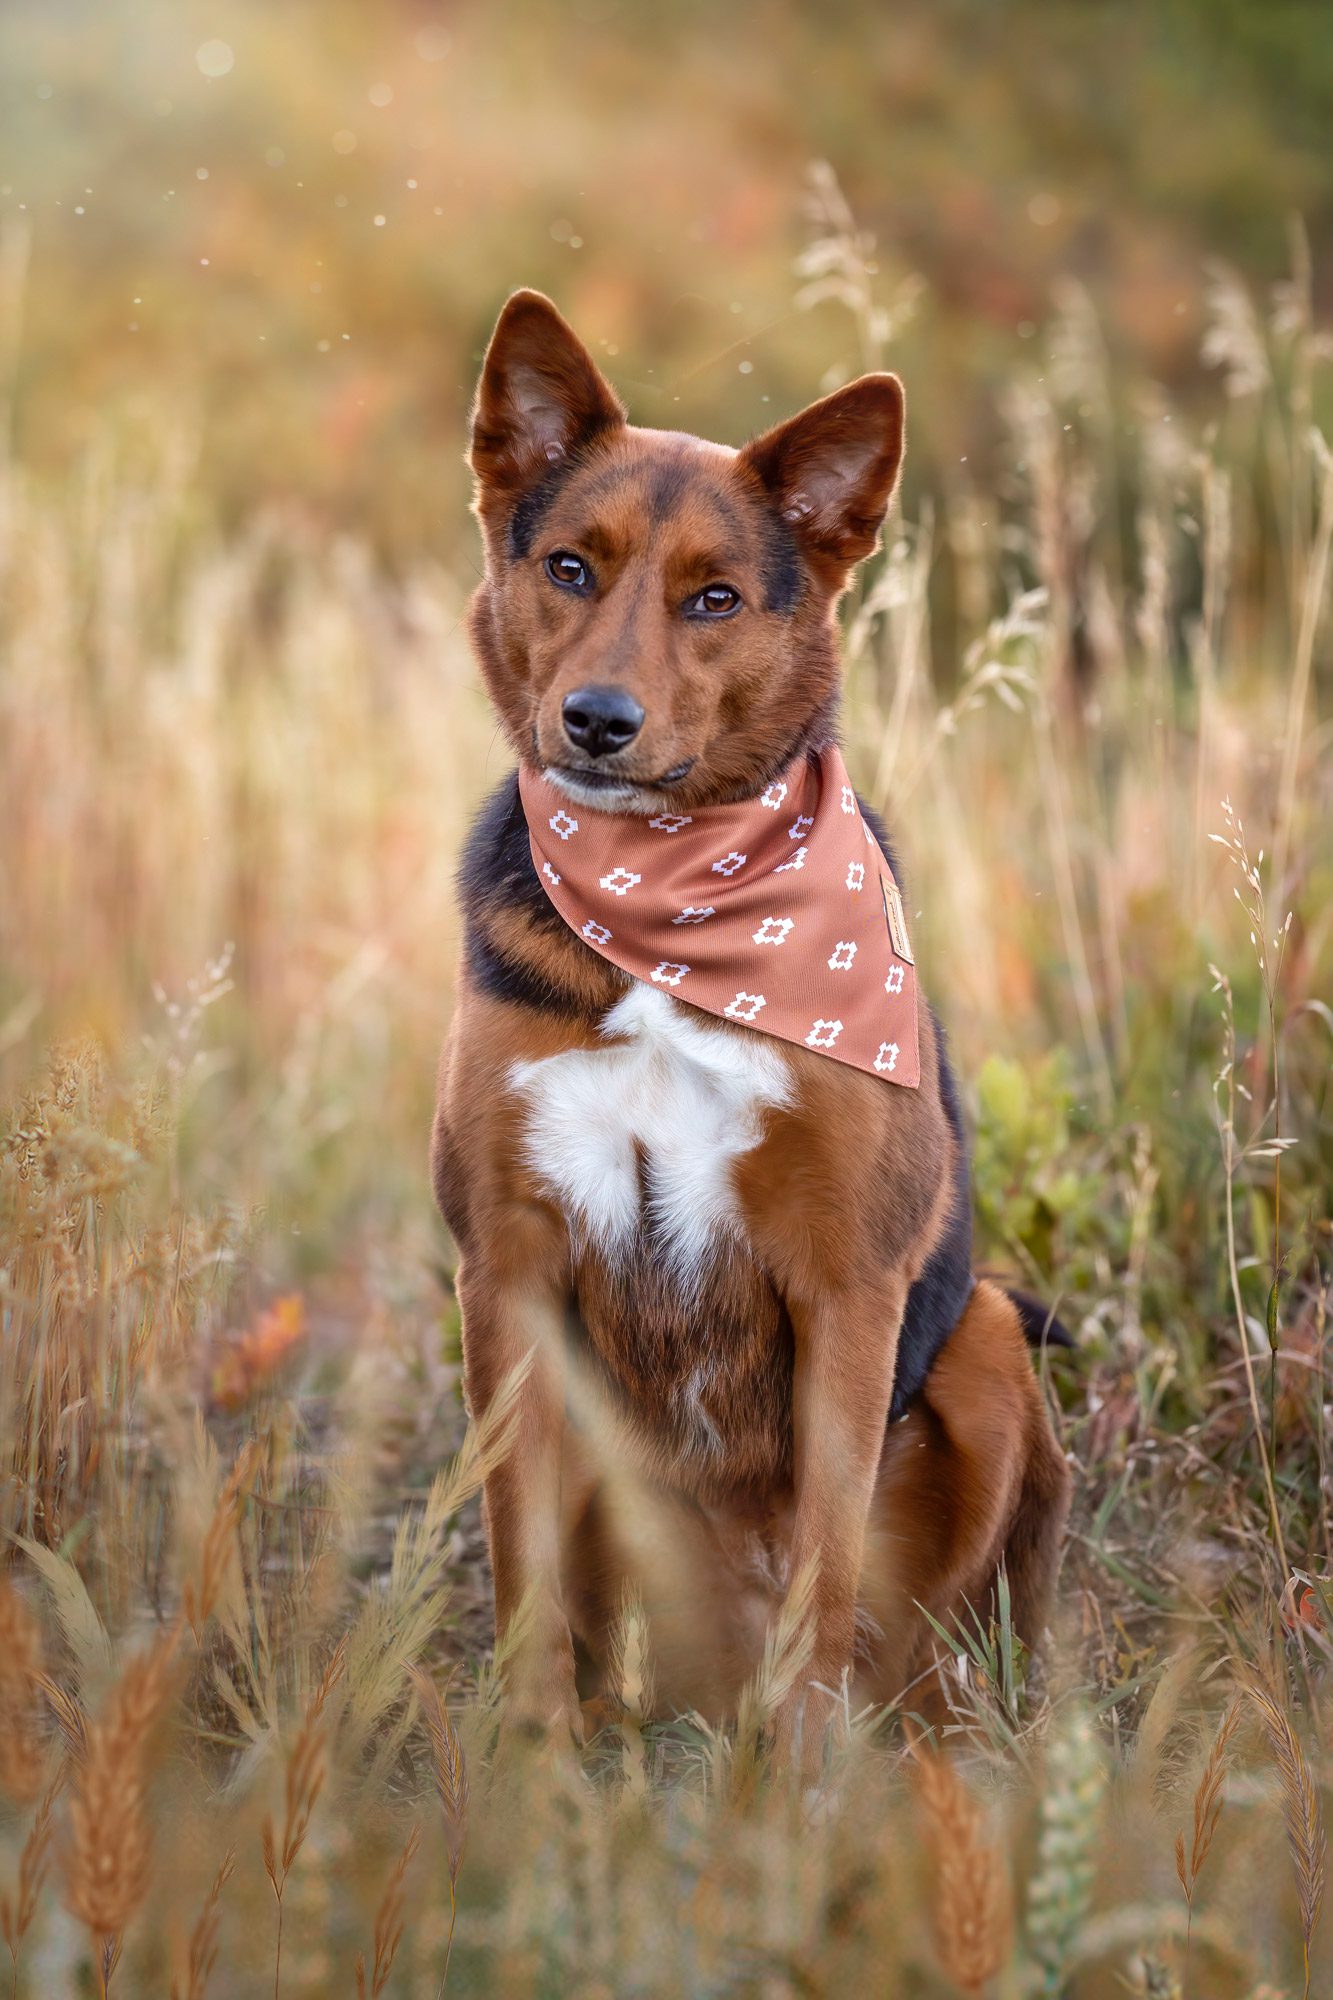 Dog with bandana sitting in a field